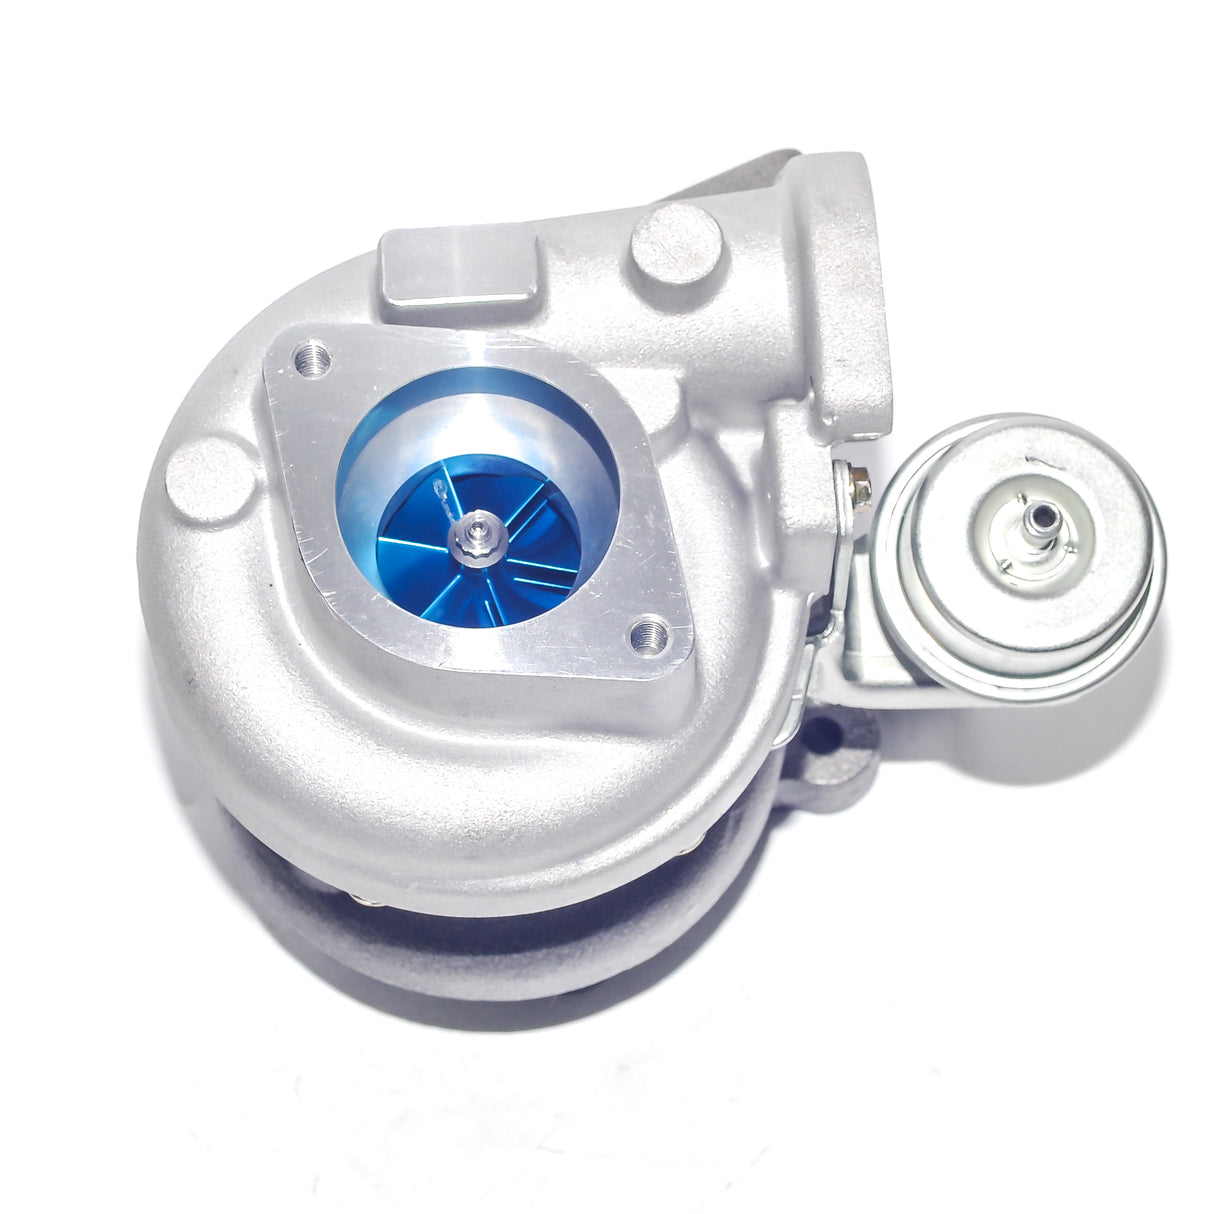 CCT Stage One Billet Turbo charger To Suit &nbsp;Nissan Patrol GU Y61 RD28 2.8L 14411-VB300